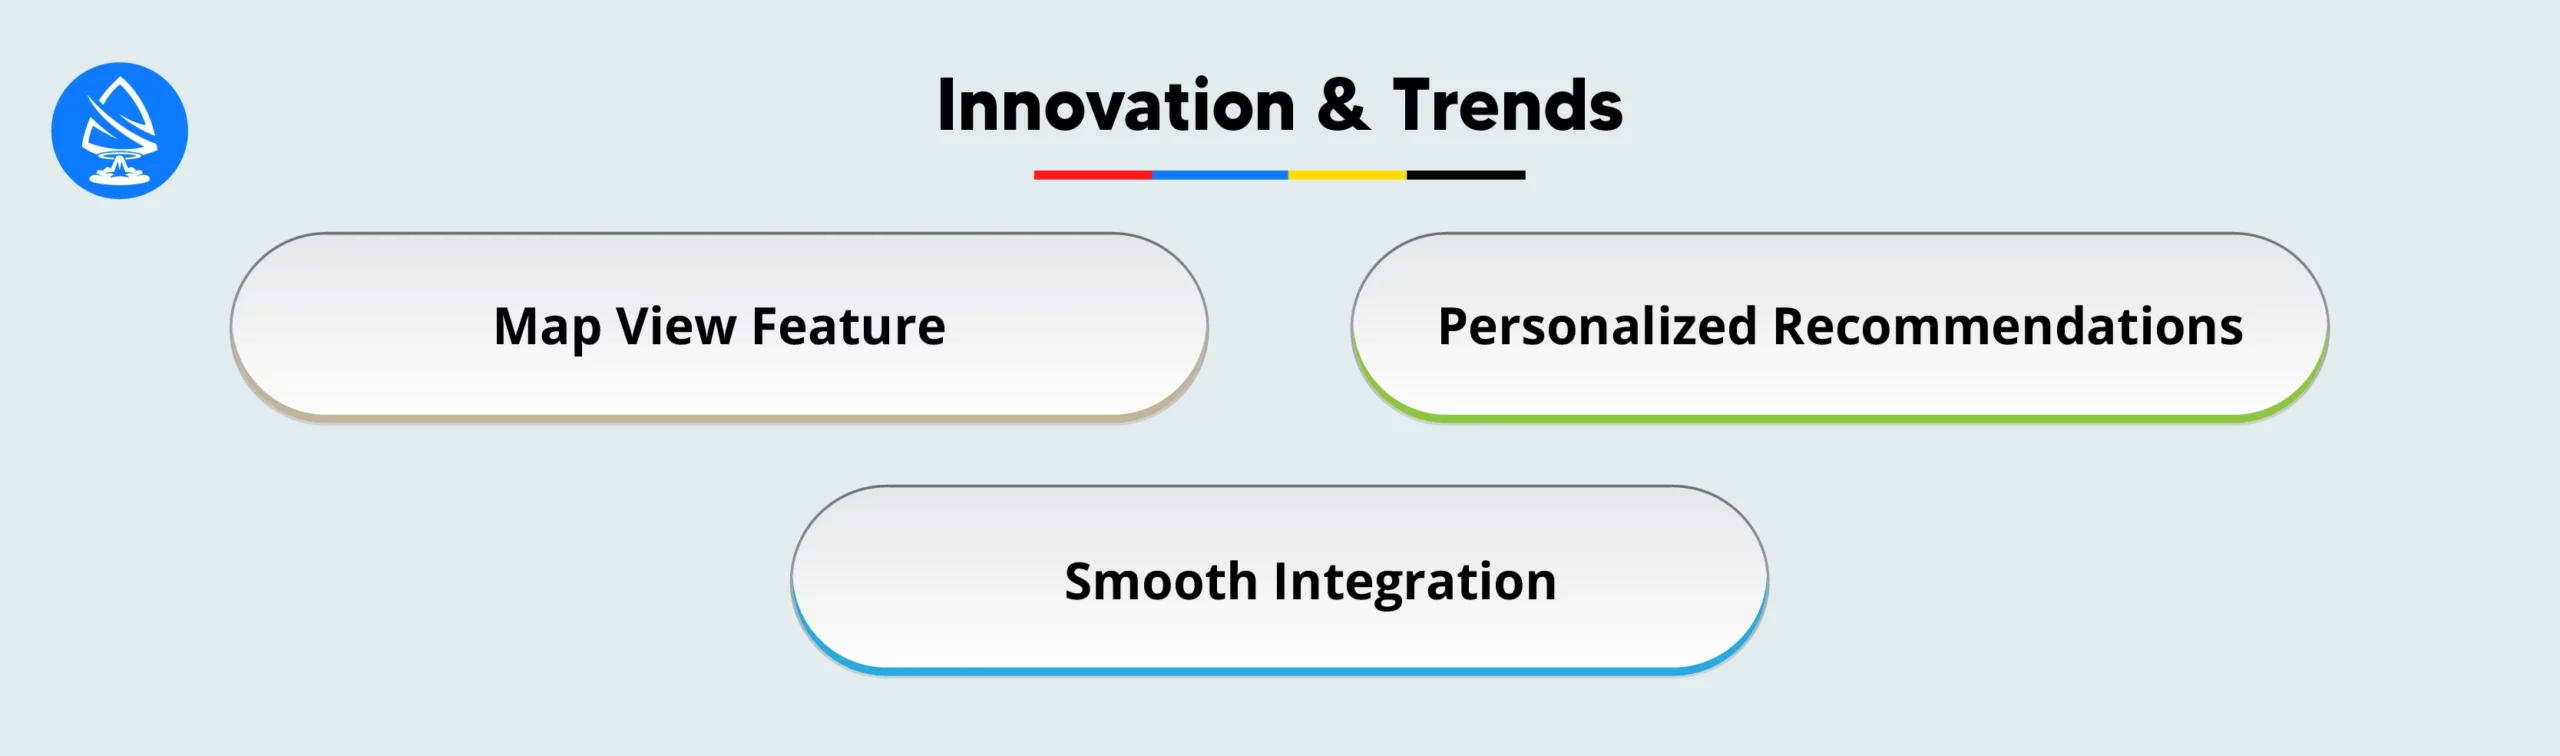 Innovation and Trends